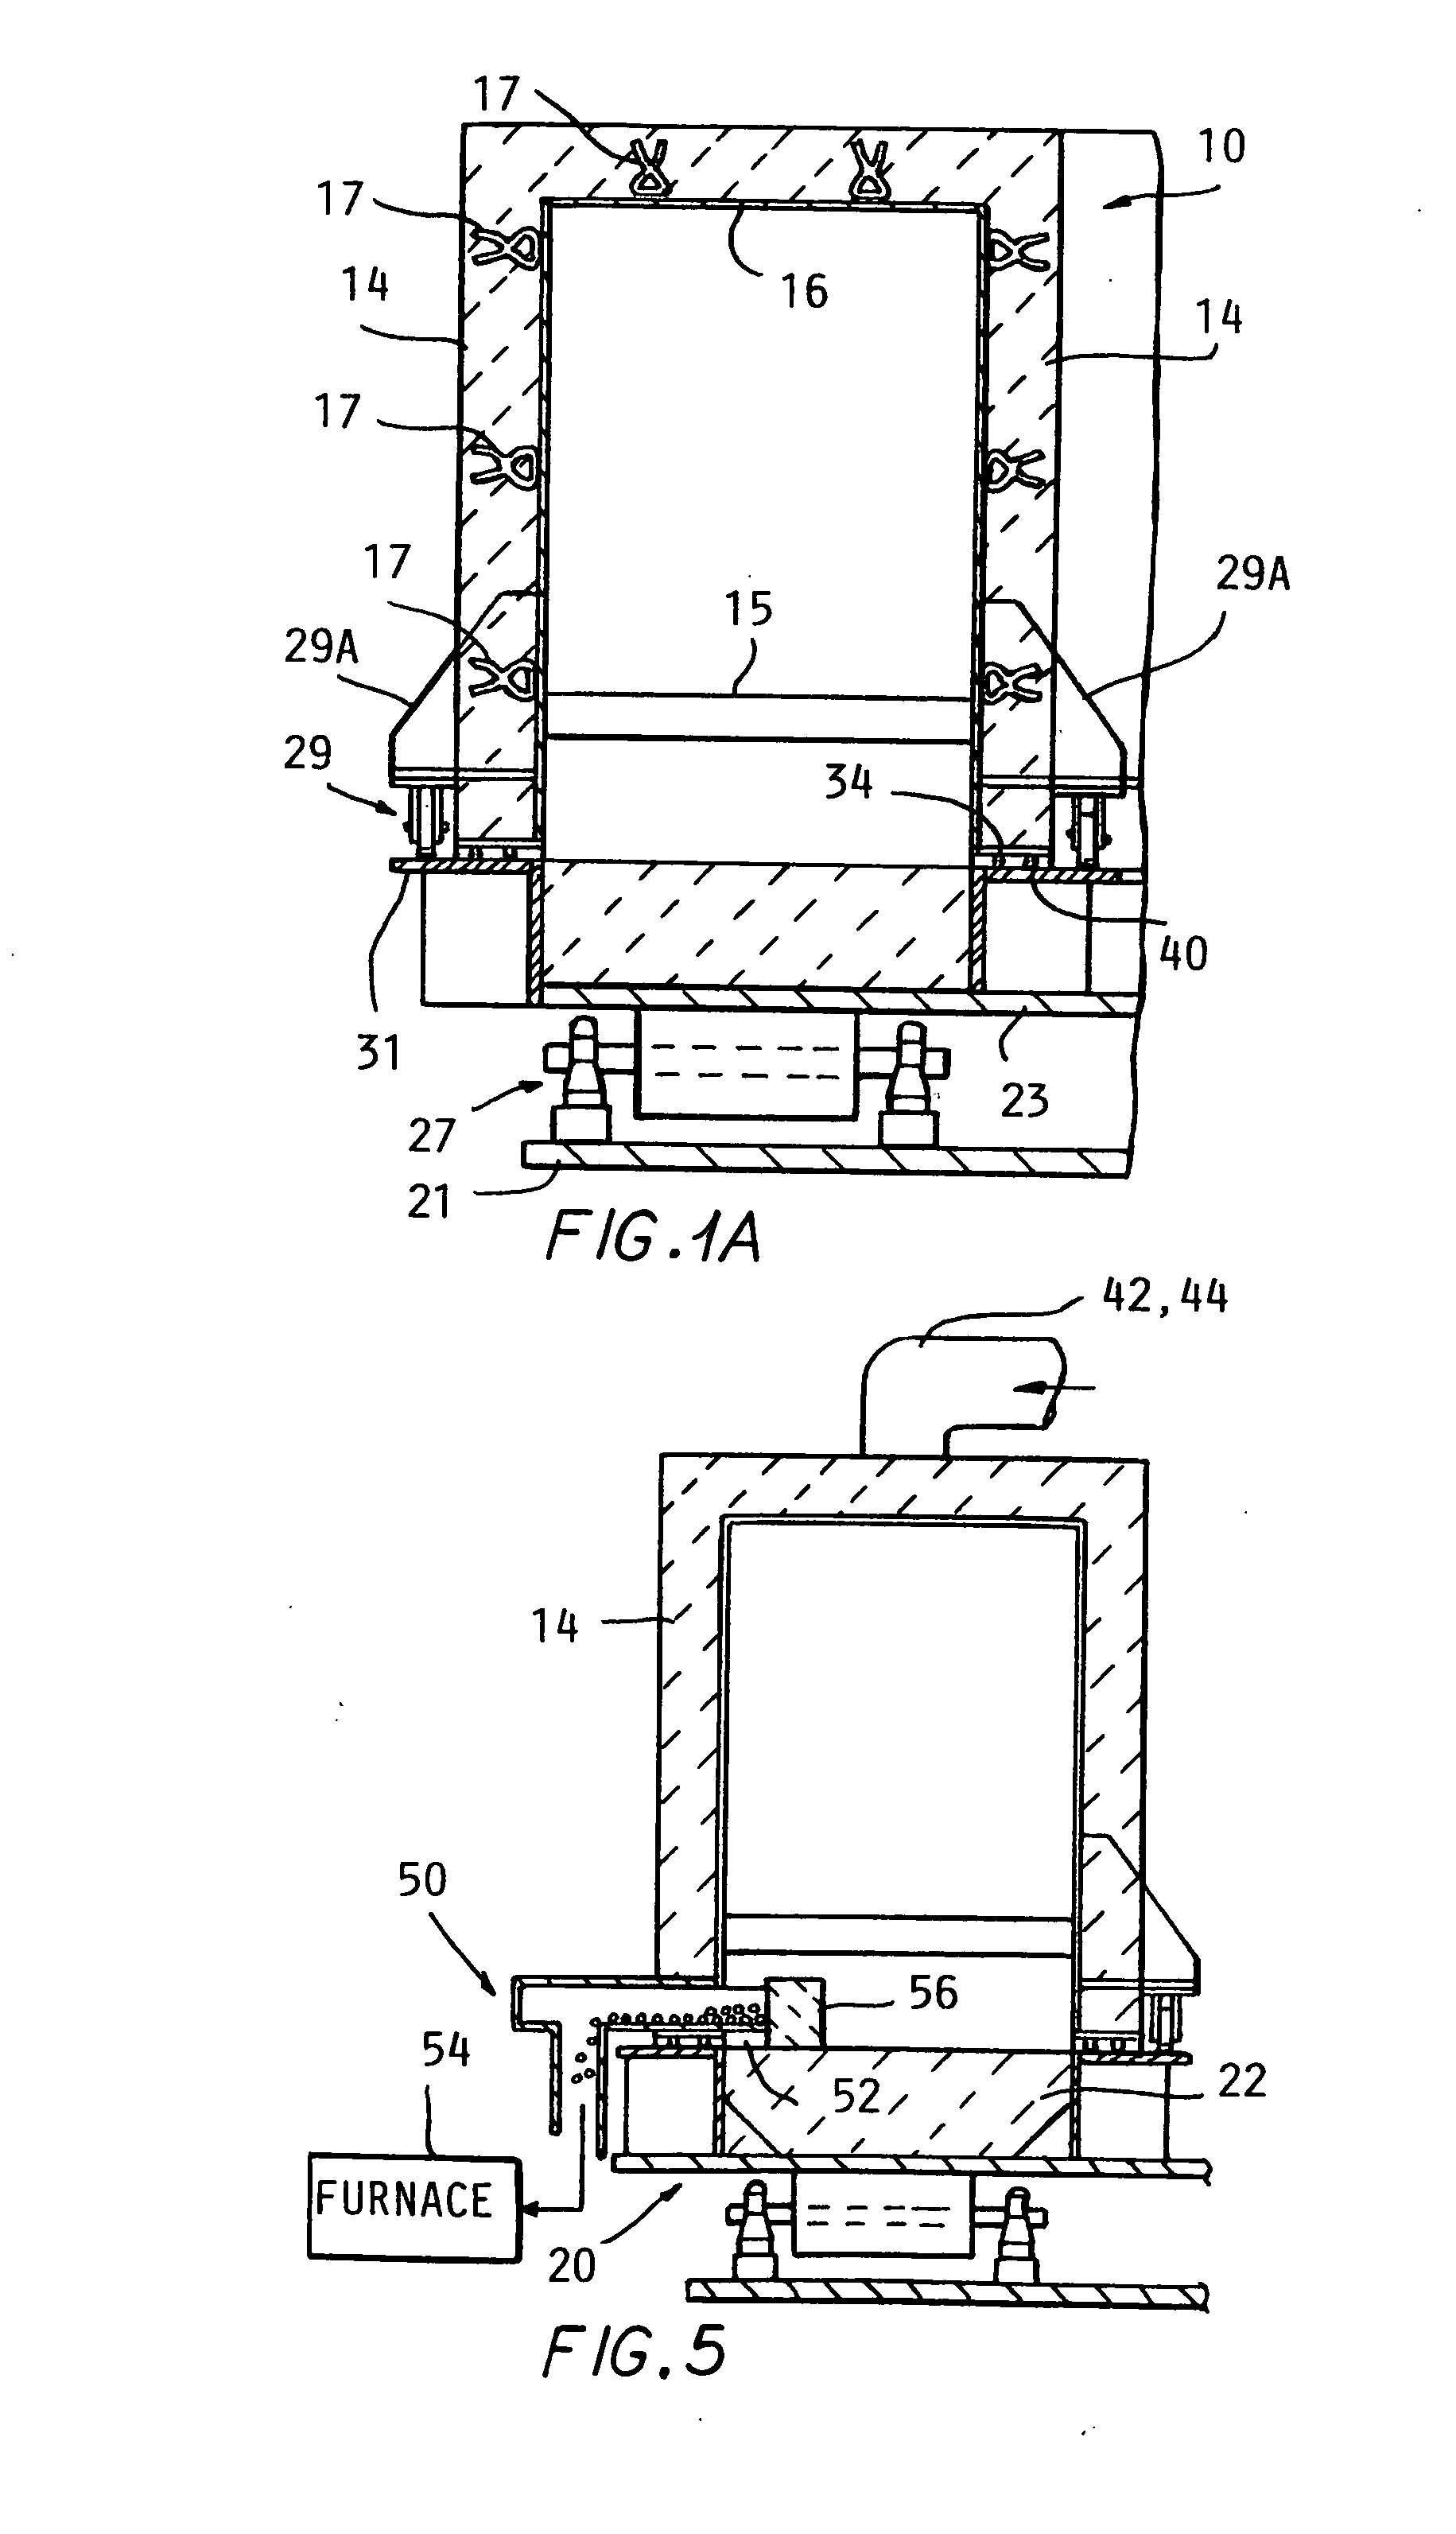 Microwave heating method and apparatus for iron oxide reduction